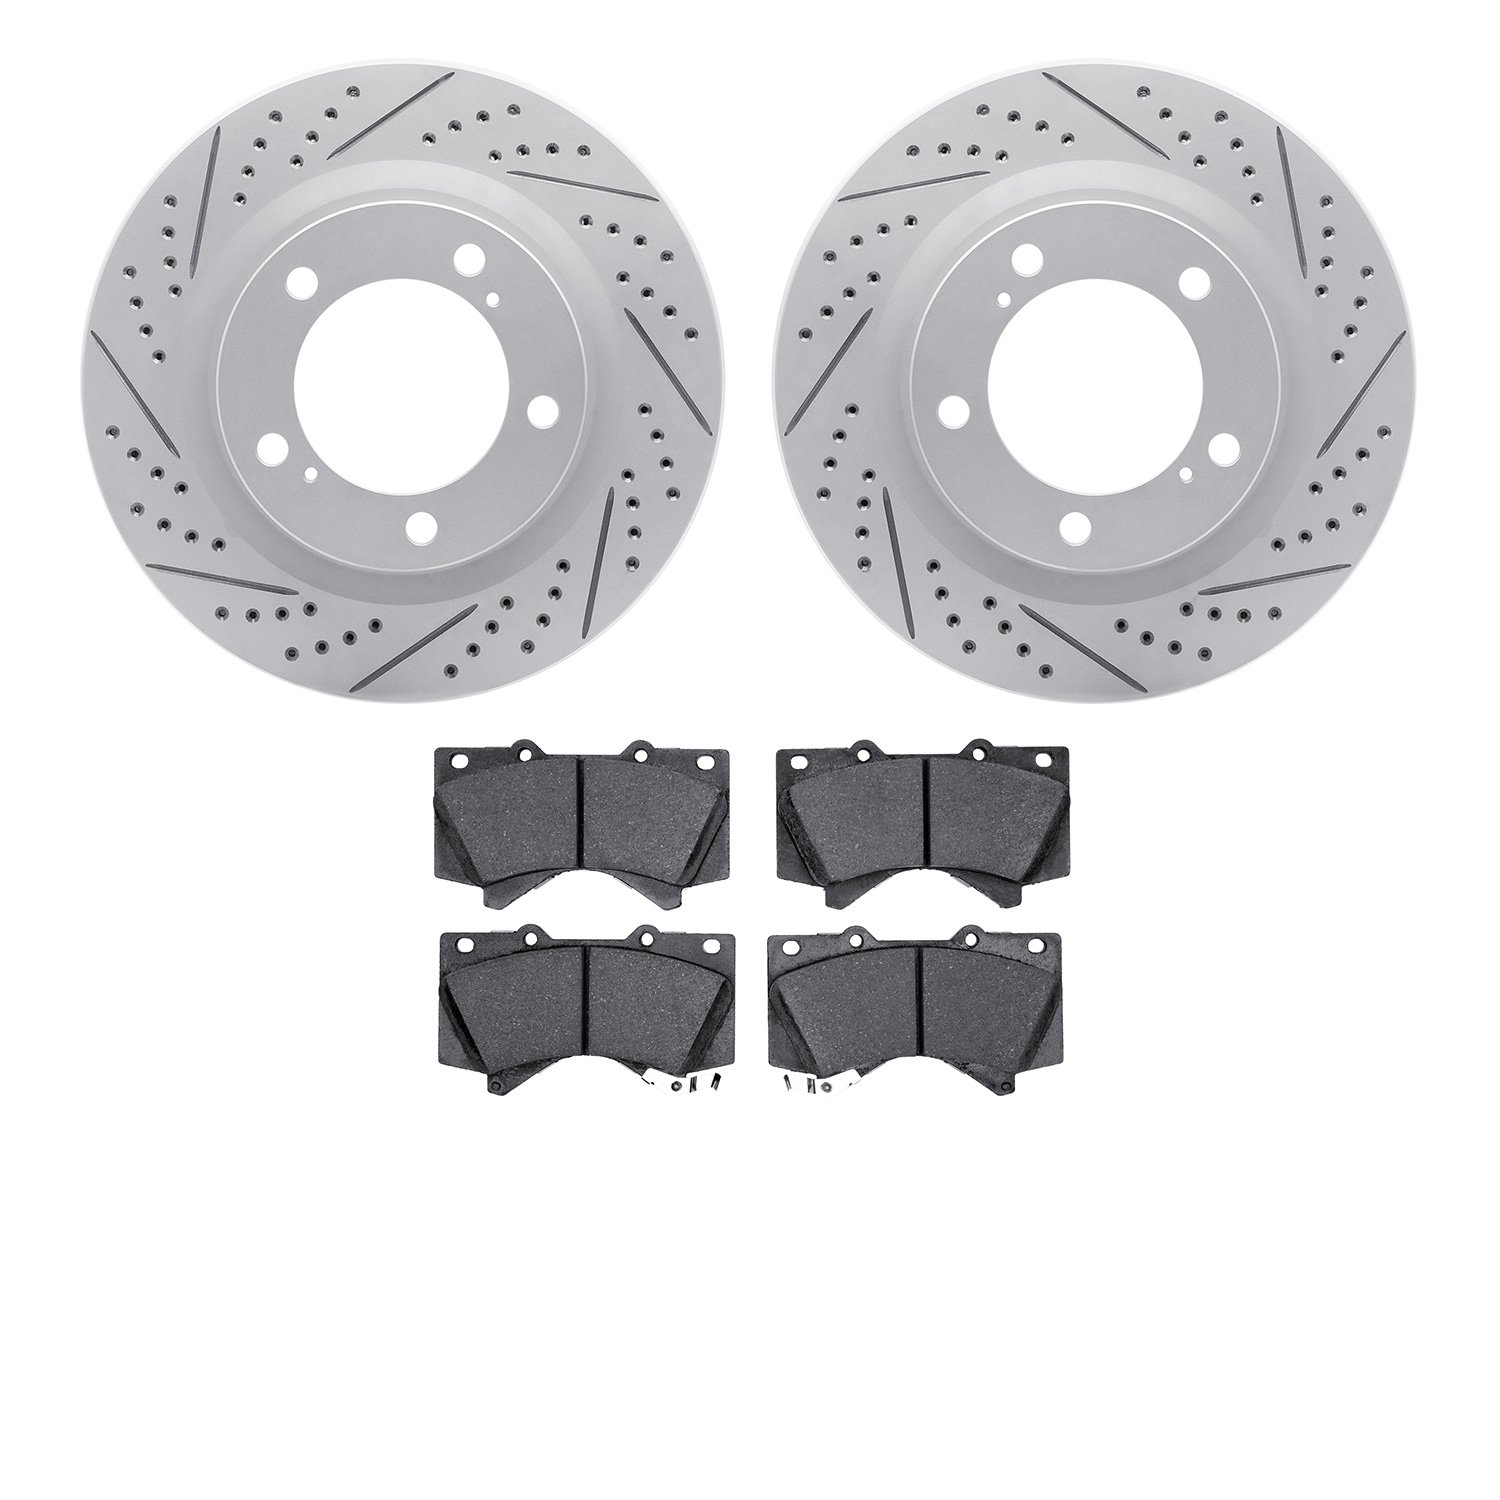 2202-76005 Geoperformance Drilled/Slotted Rotors w/Heavy-Duty Pads Kit, Fits Select Lexus/Toyota/Scion, Position: Front